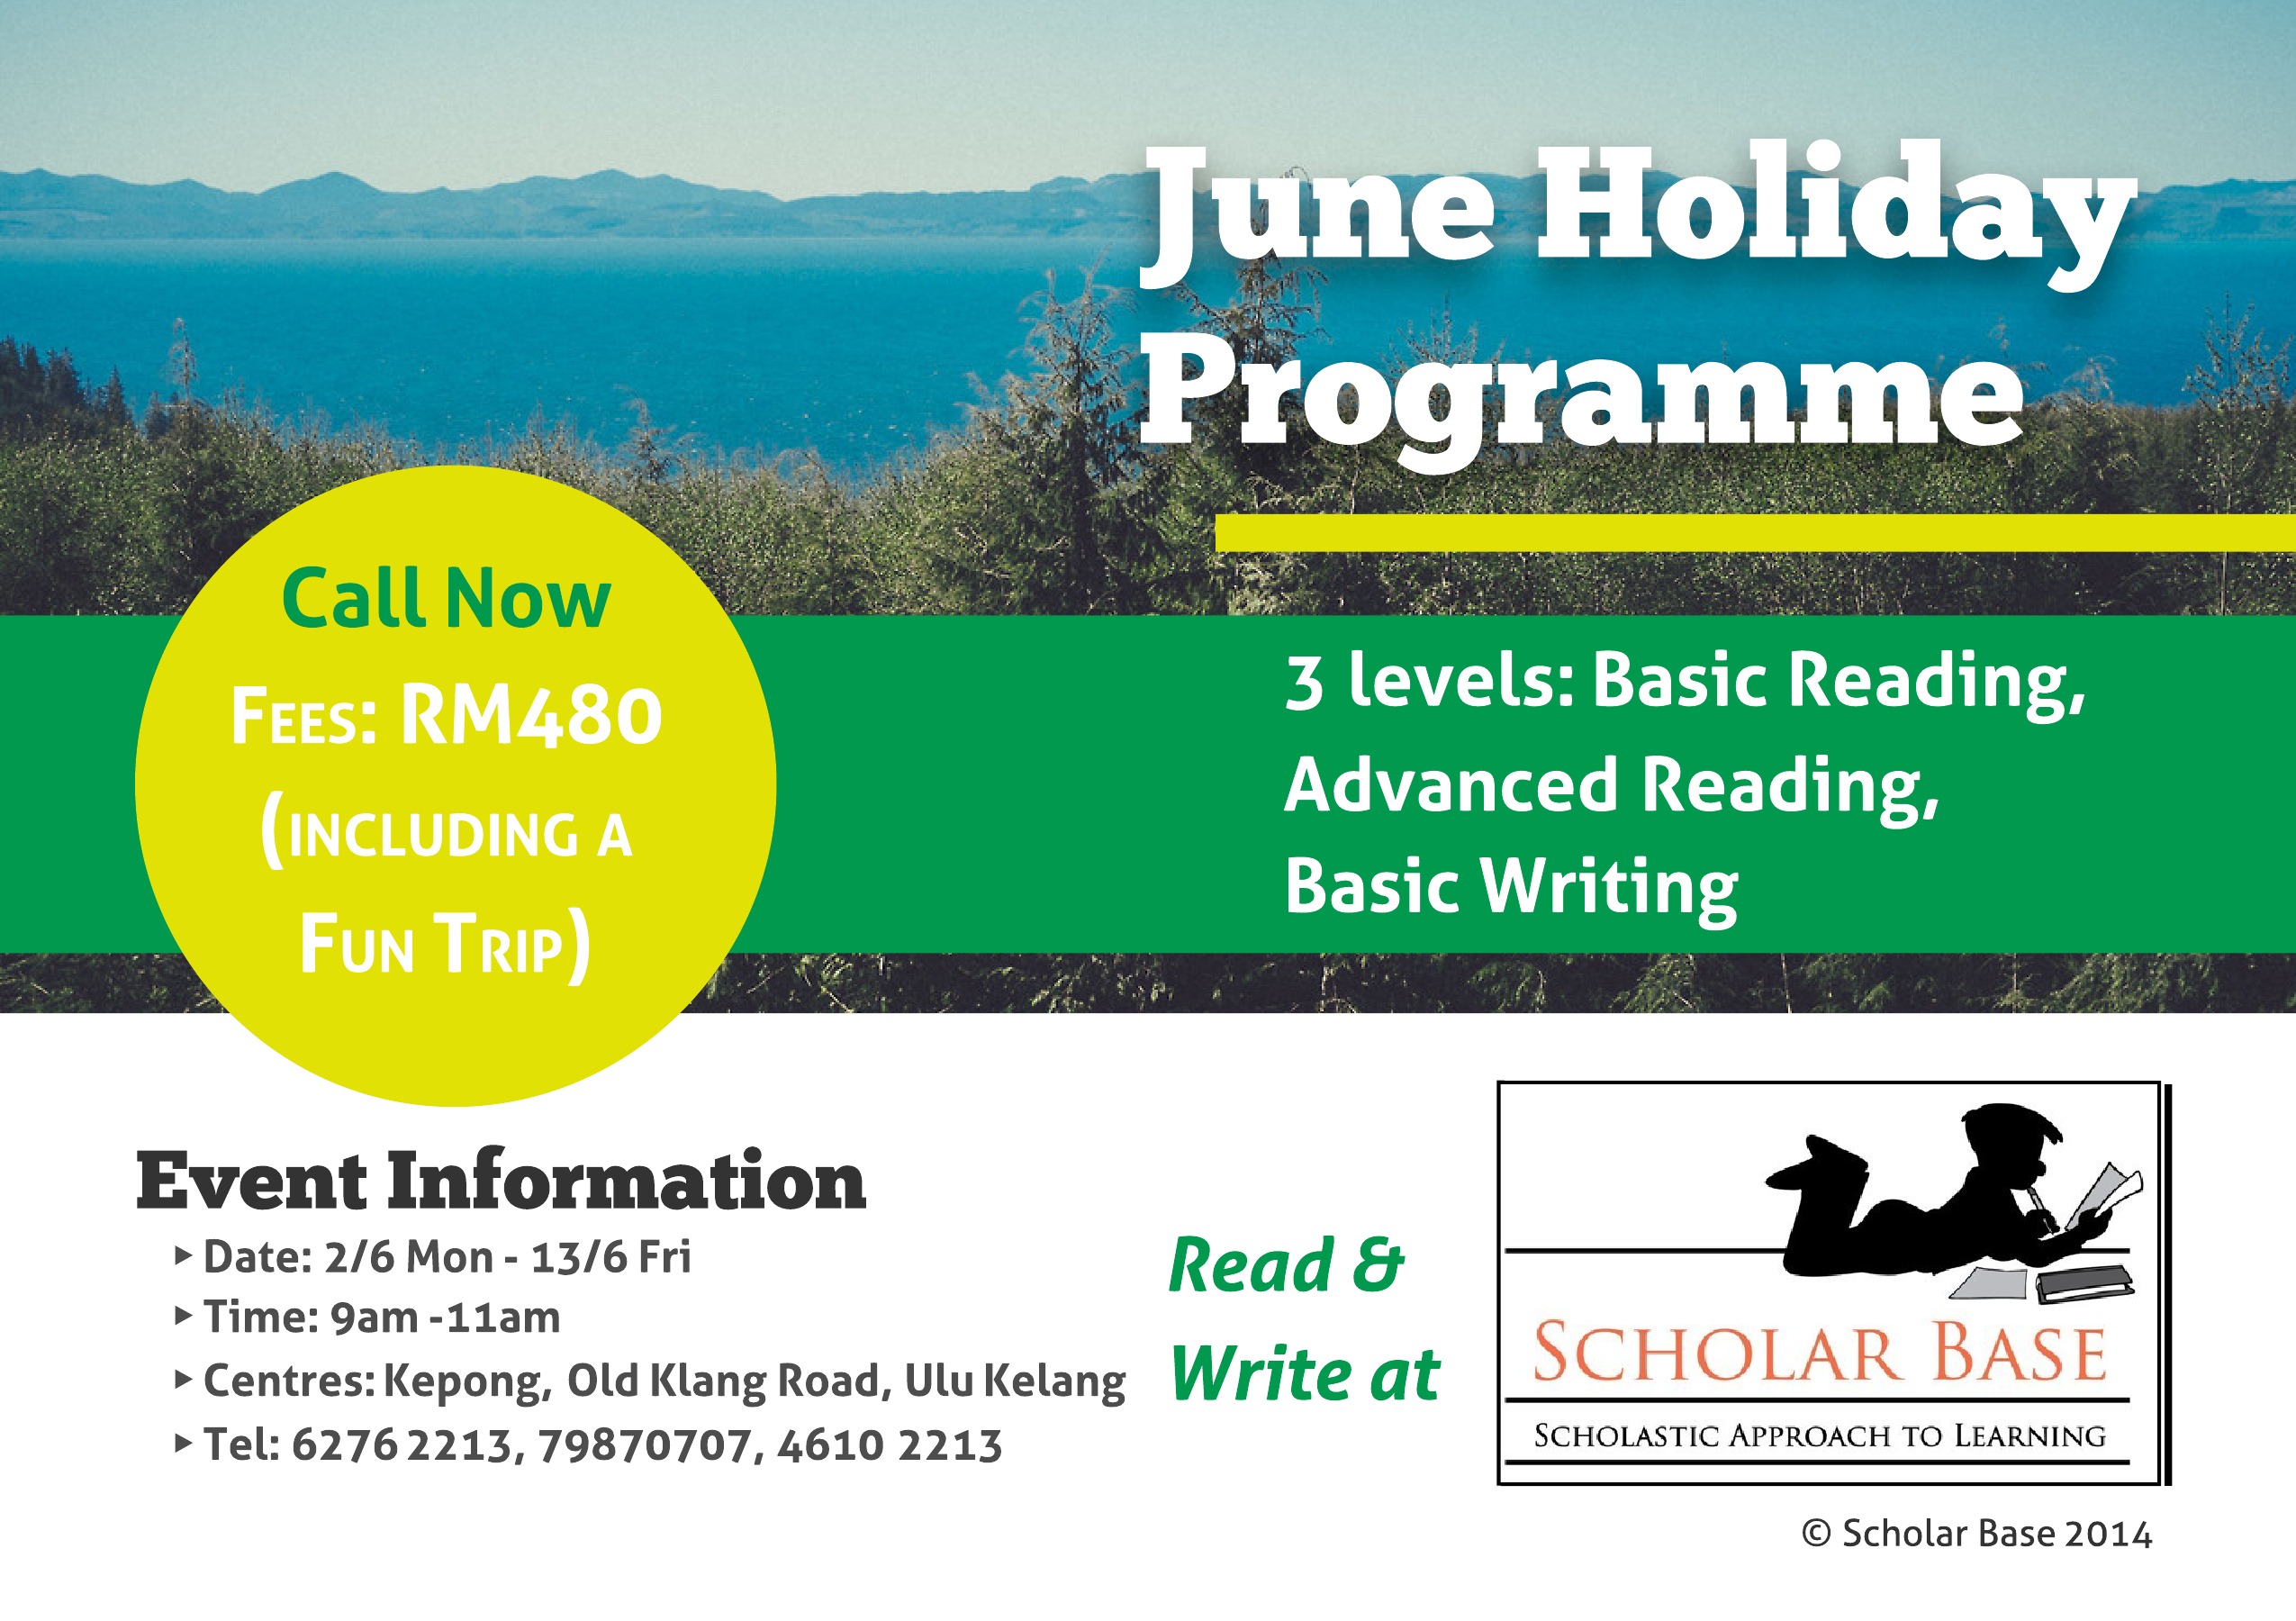 Scholar Base's Holistic Programme Includes Reading and Writing Courses, as Well as Excursions